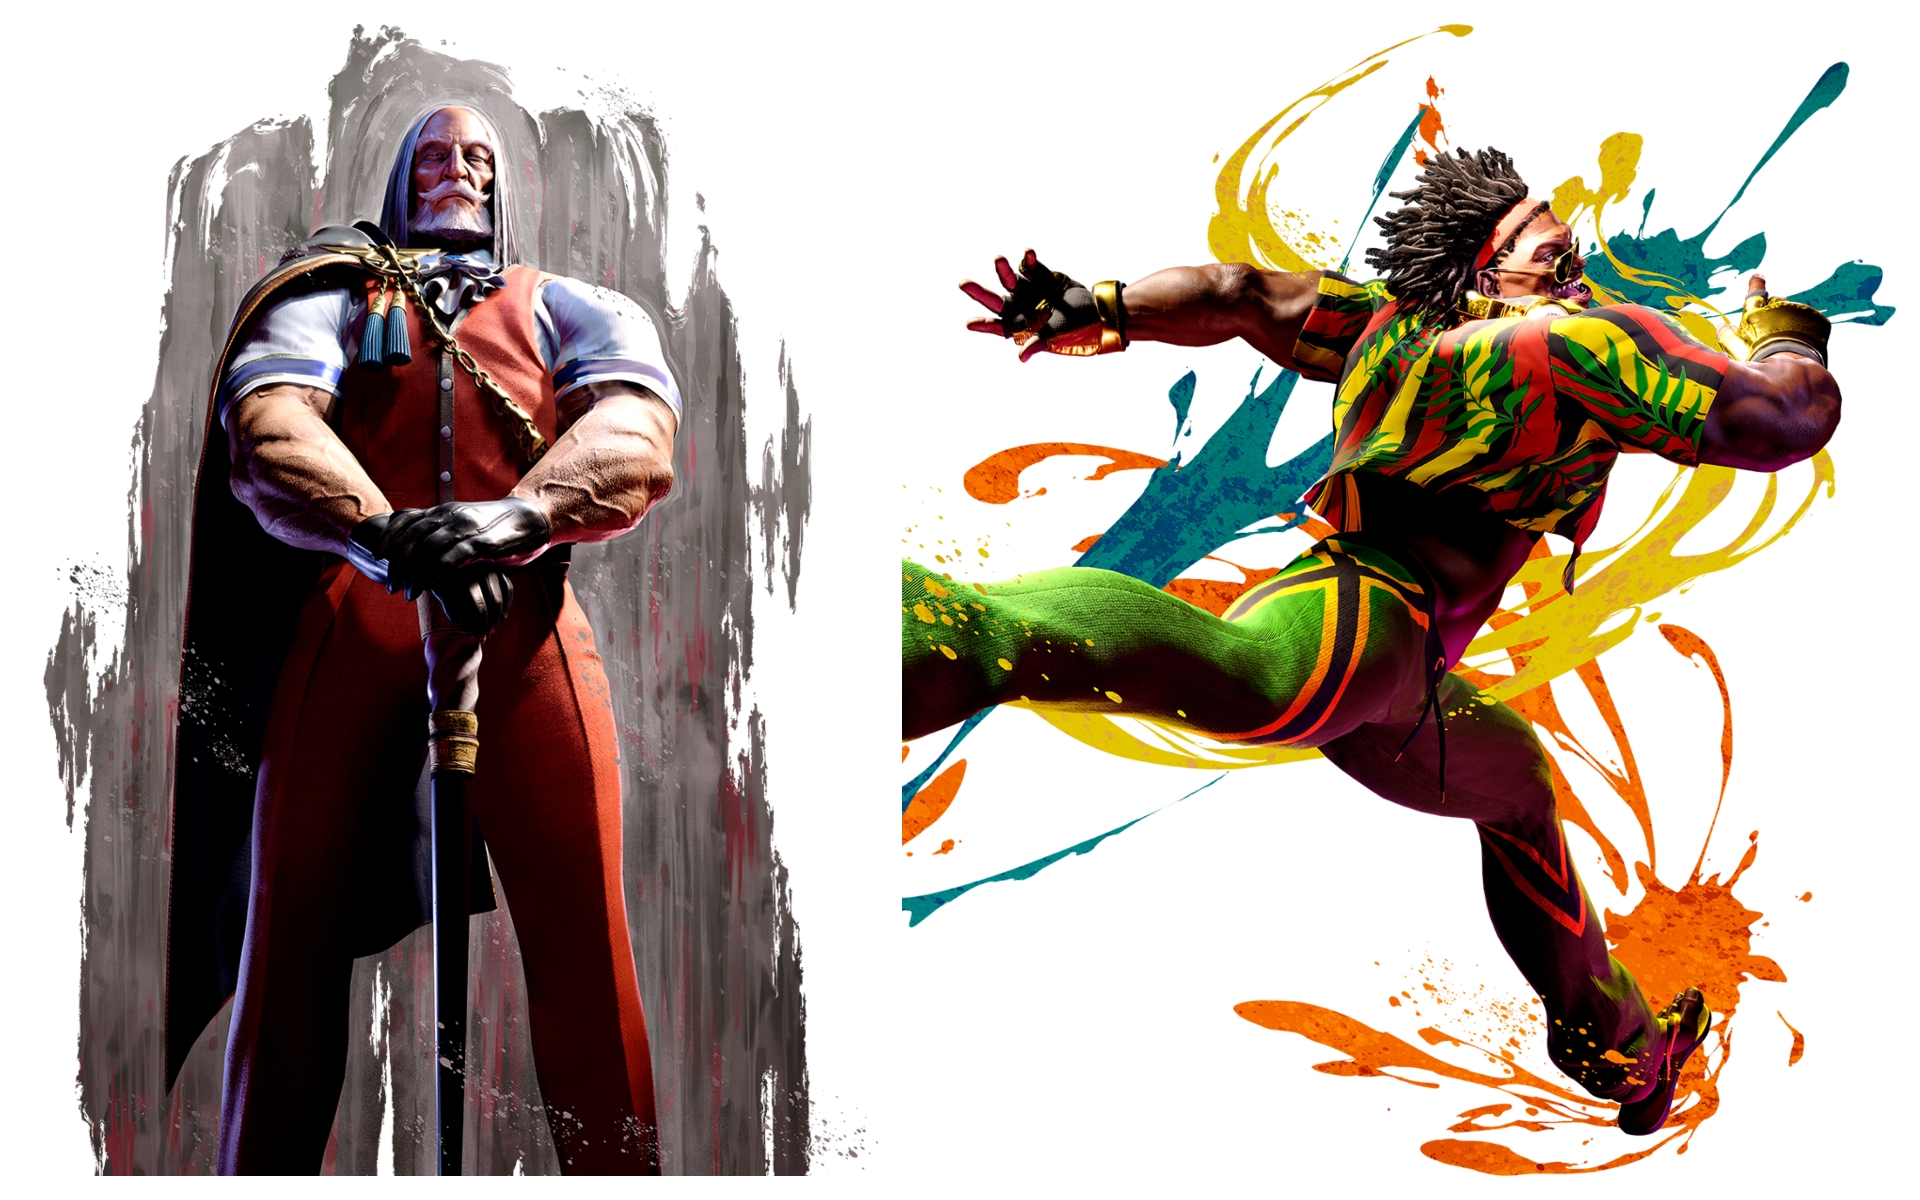 According to Capcom, Street Fighter 6 new characters Dee Jay, Manon, Marisa, and JP will be playable. Additionally mentioned were pre-order incentives, game...